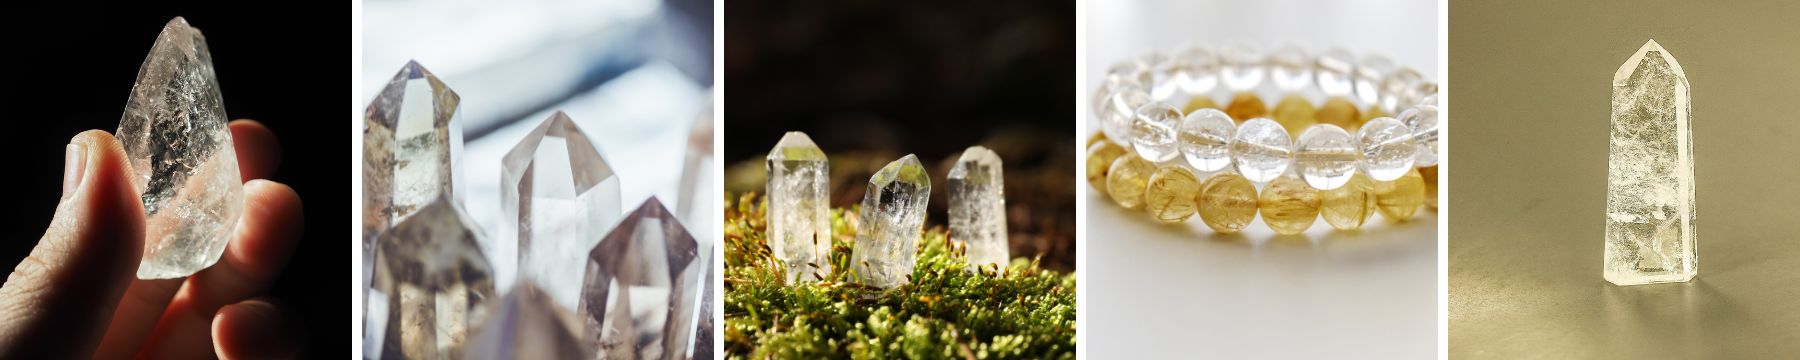 how much are crystals worth - quartz crystal value